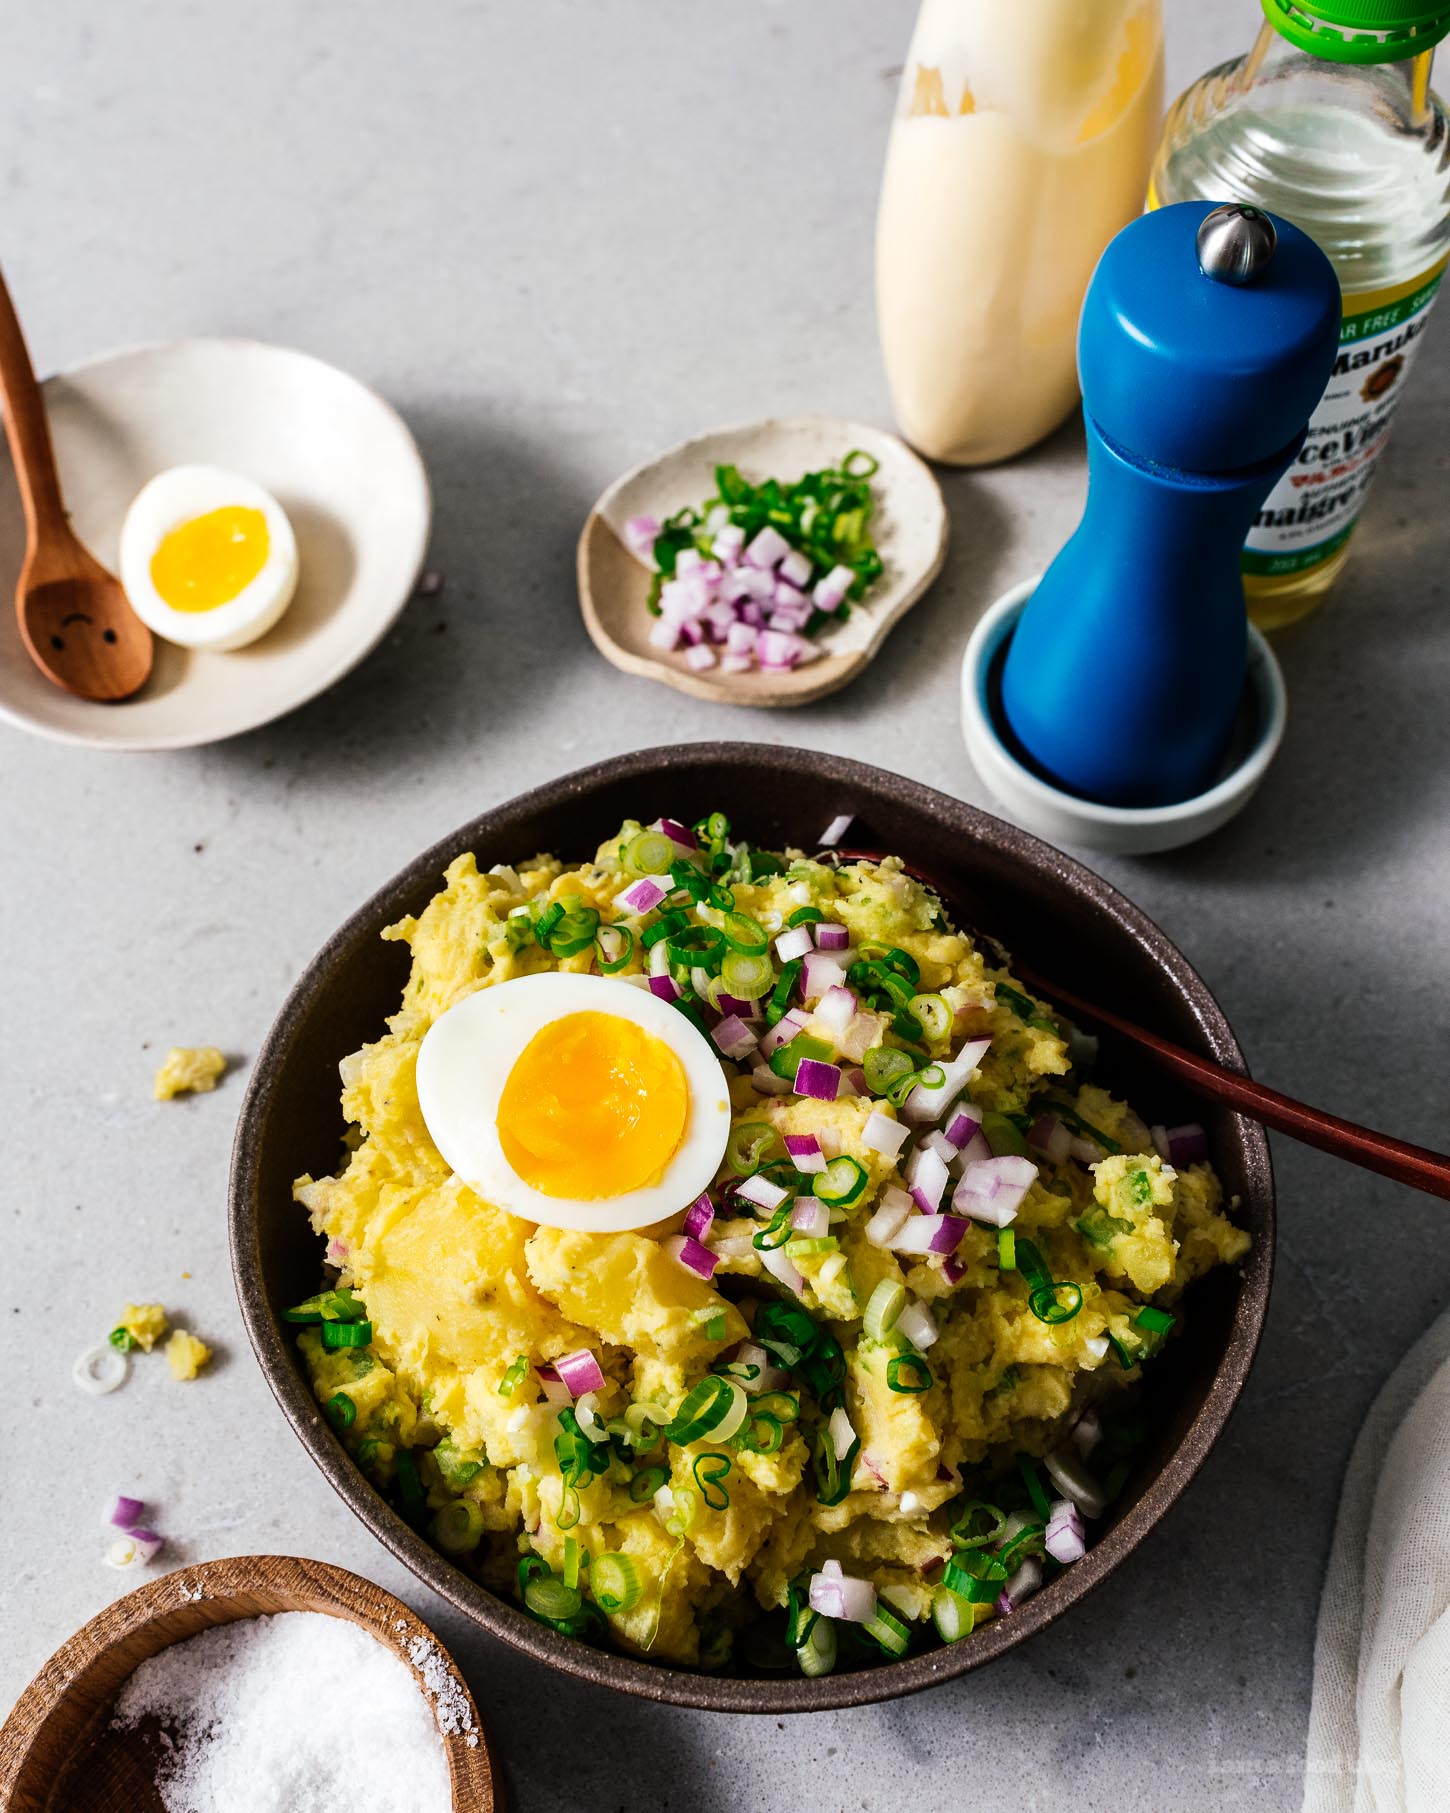 Make this classic perfect picnic potato salad and bring it to ever summer gathering! Creamy potatoes, crunchy celery, onions, and eggs combine into a salad you’ll be making and eating over and over again thanks to a secret ingredient: rice vinegar for tang. #potatosalad #potatoes #recipes #potatosaladrecipe